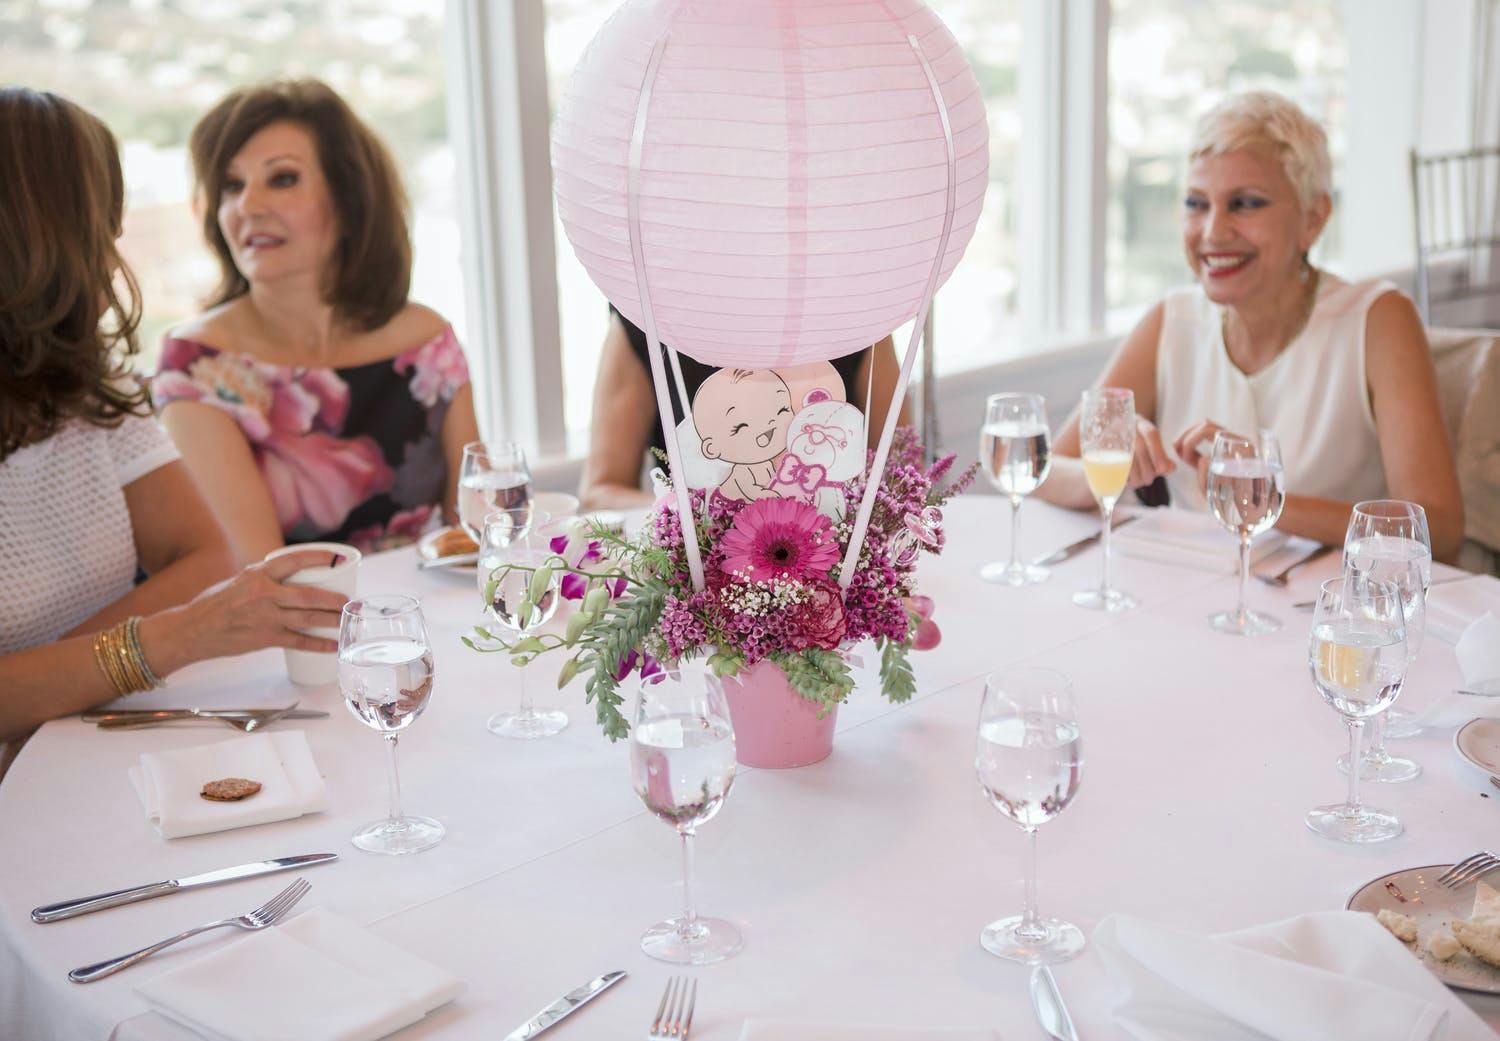 Four Women Sit Around a Table at a Baby Shower With Pink Hot Air Balloon Centerpiece | PartySlate